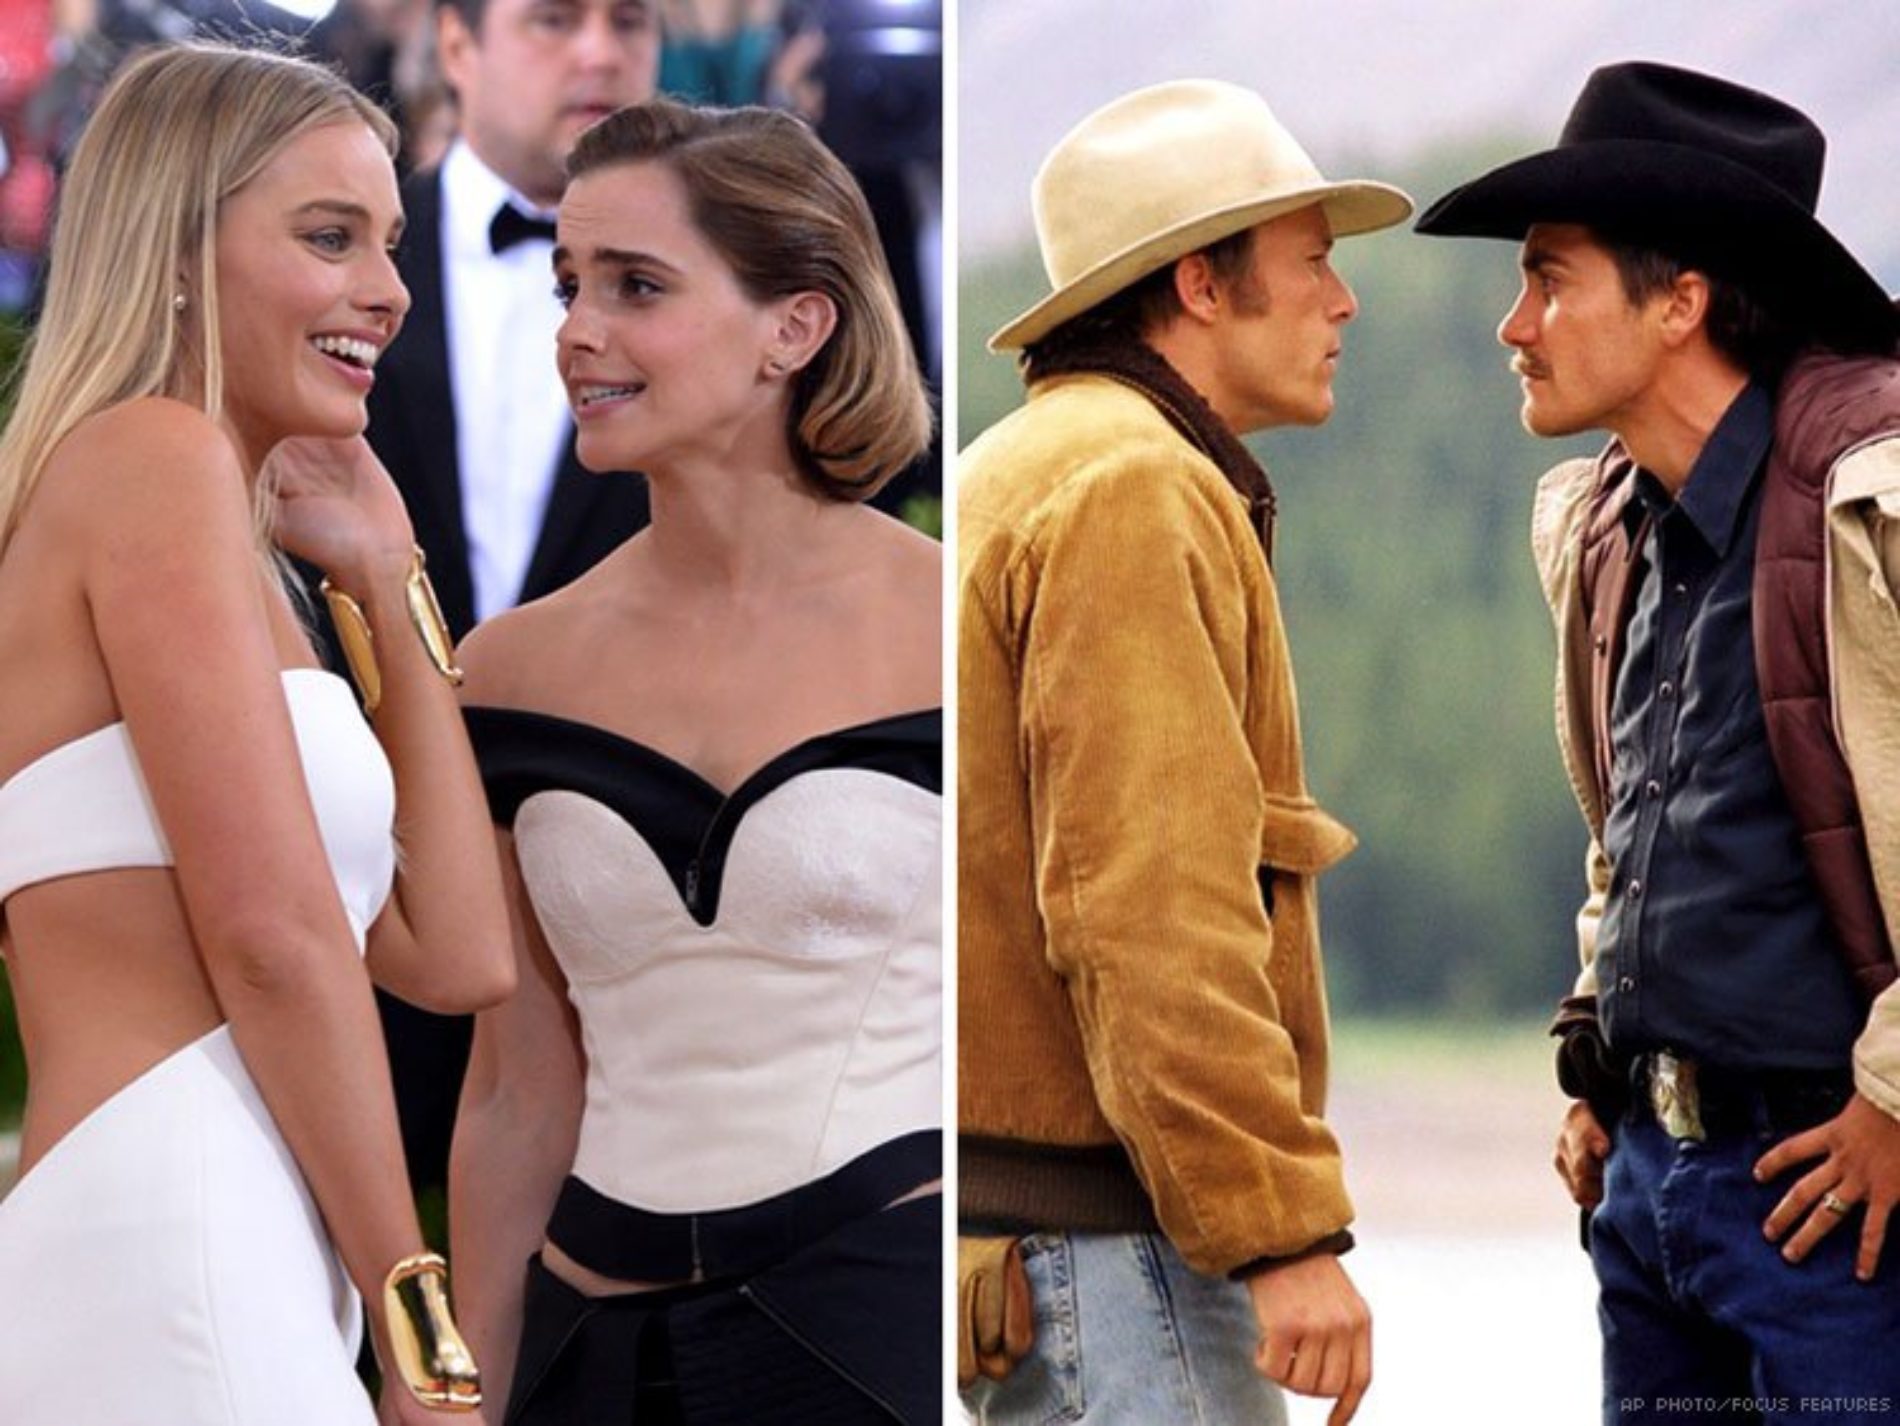 The Lesbian ‘Brokeback Mountain’ Is Not a Thing